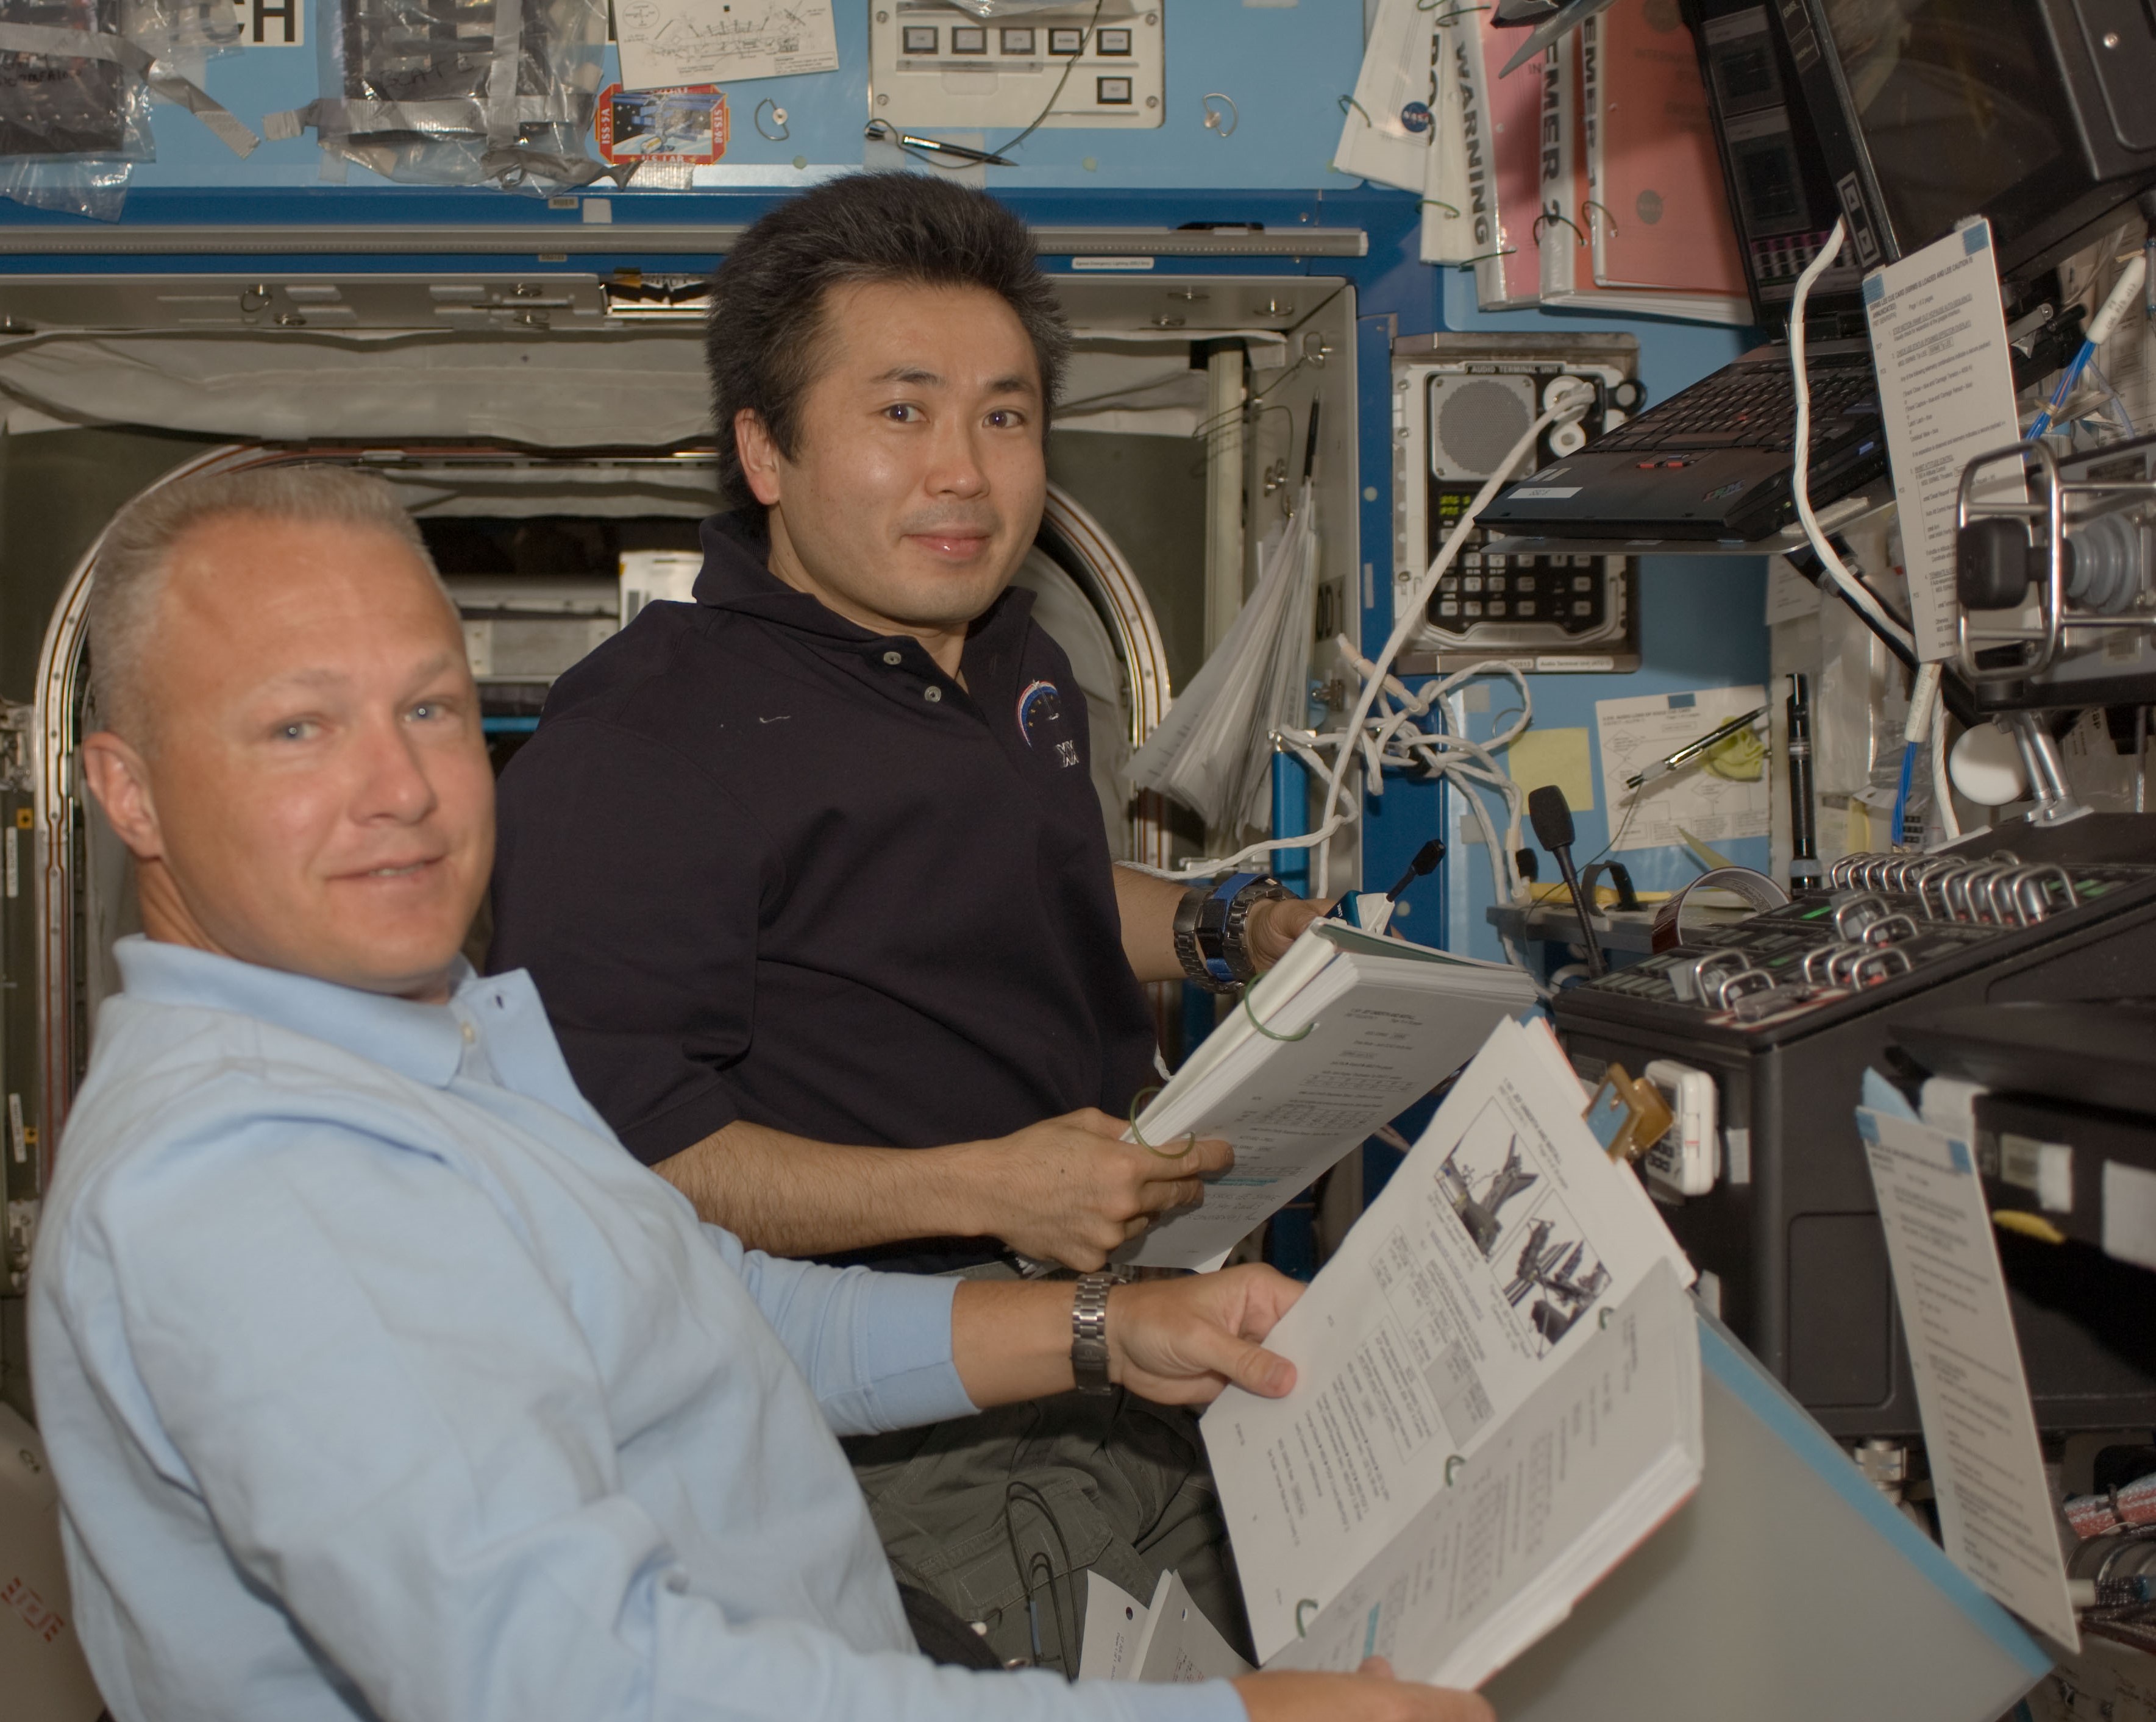 Douglas G. Hurley, left, and Koichi Wakata of the Japan Aerospace Exploration Agency operate the station's robotic arm during the first spacewalk